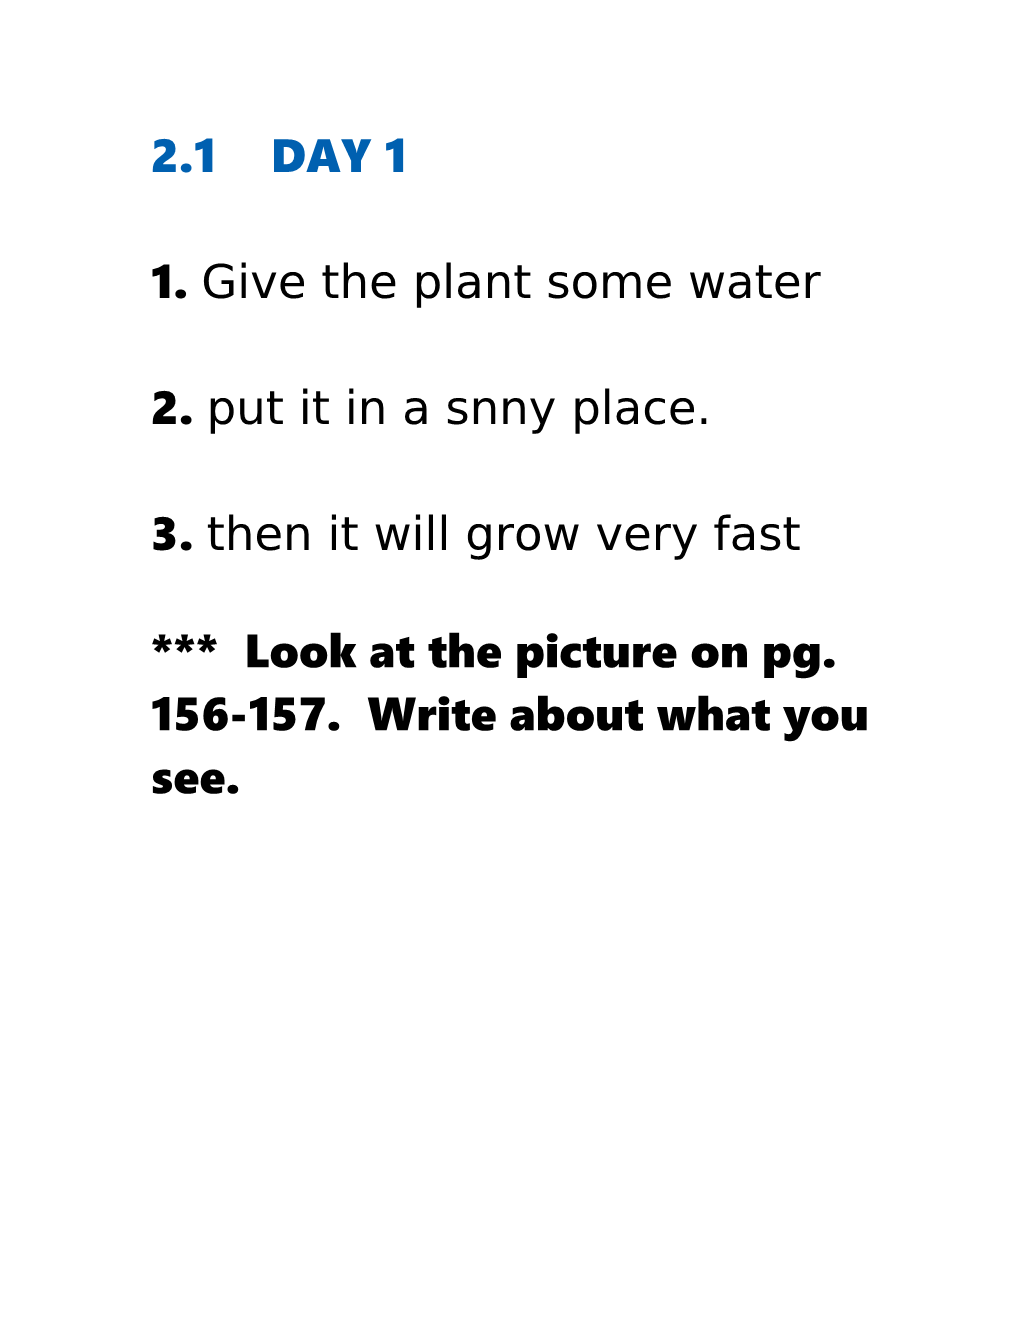 1. Give the Plant Some Water